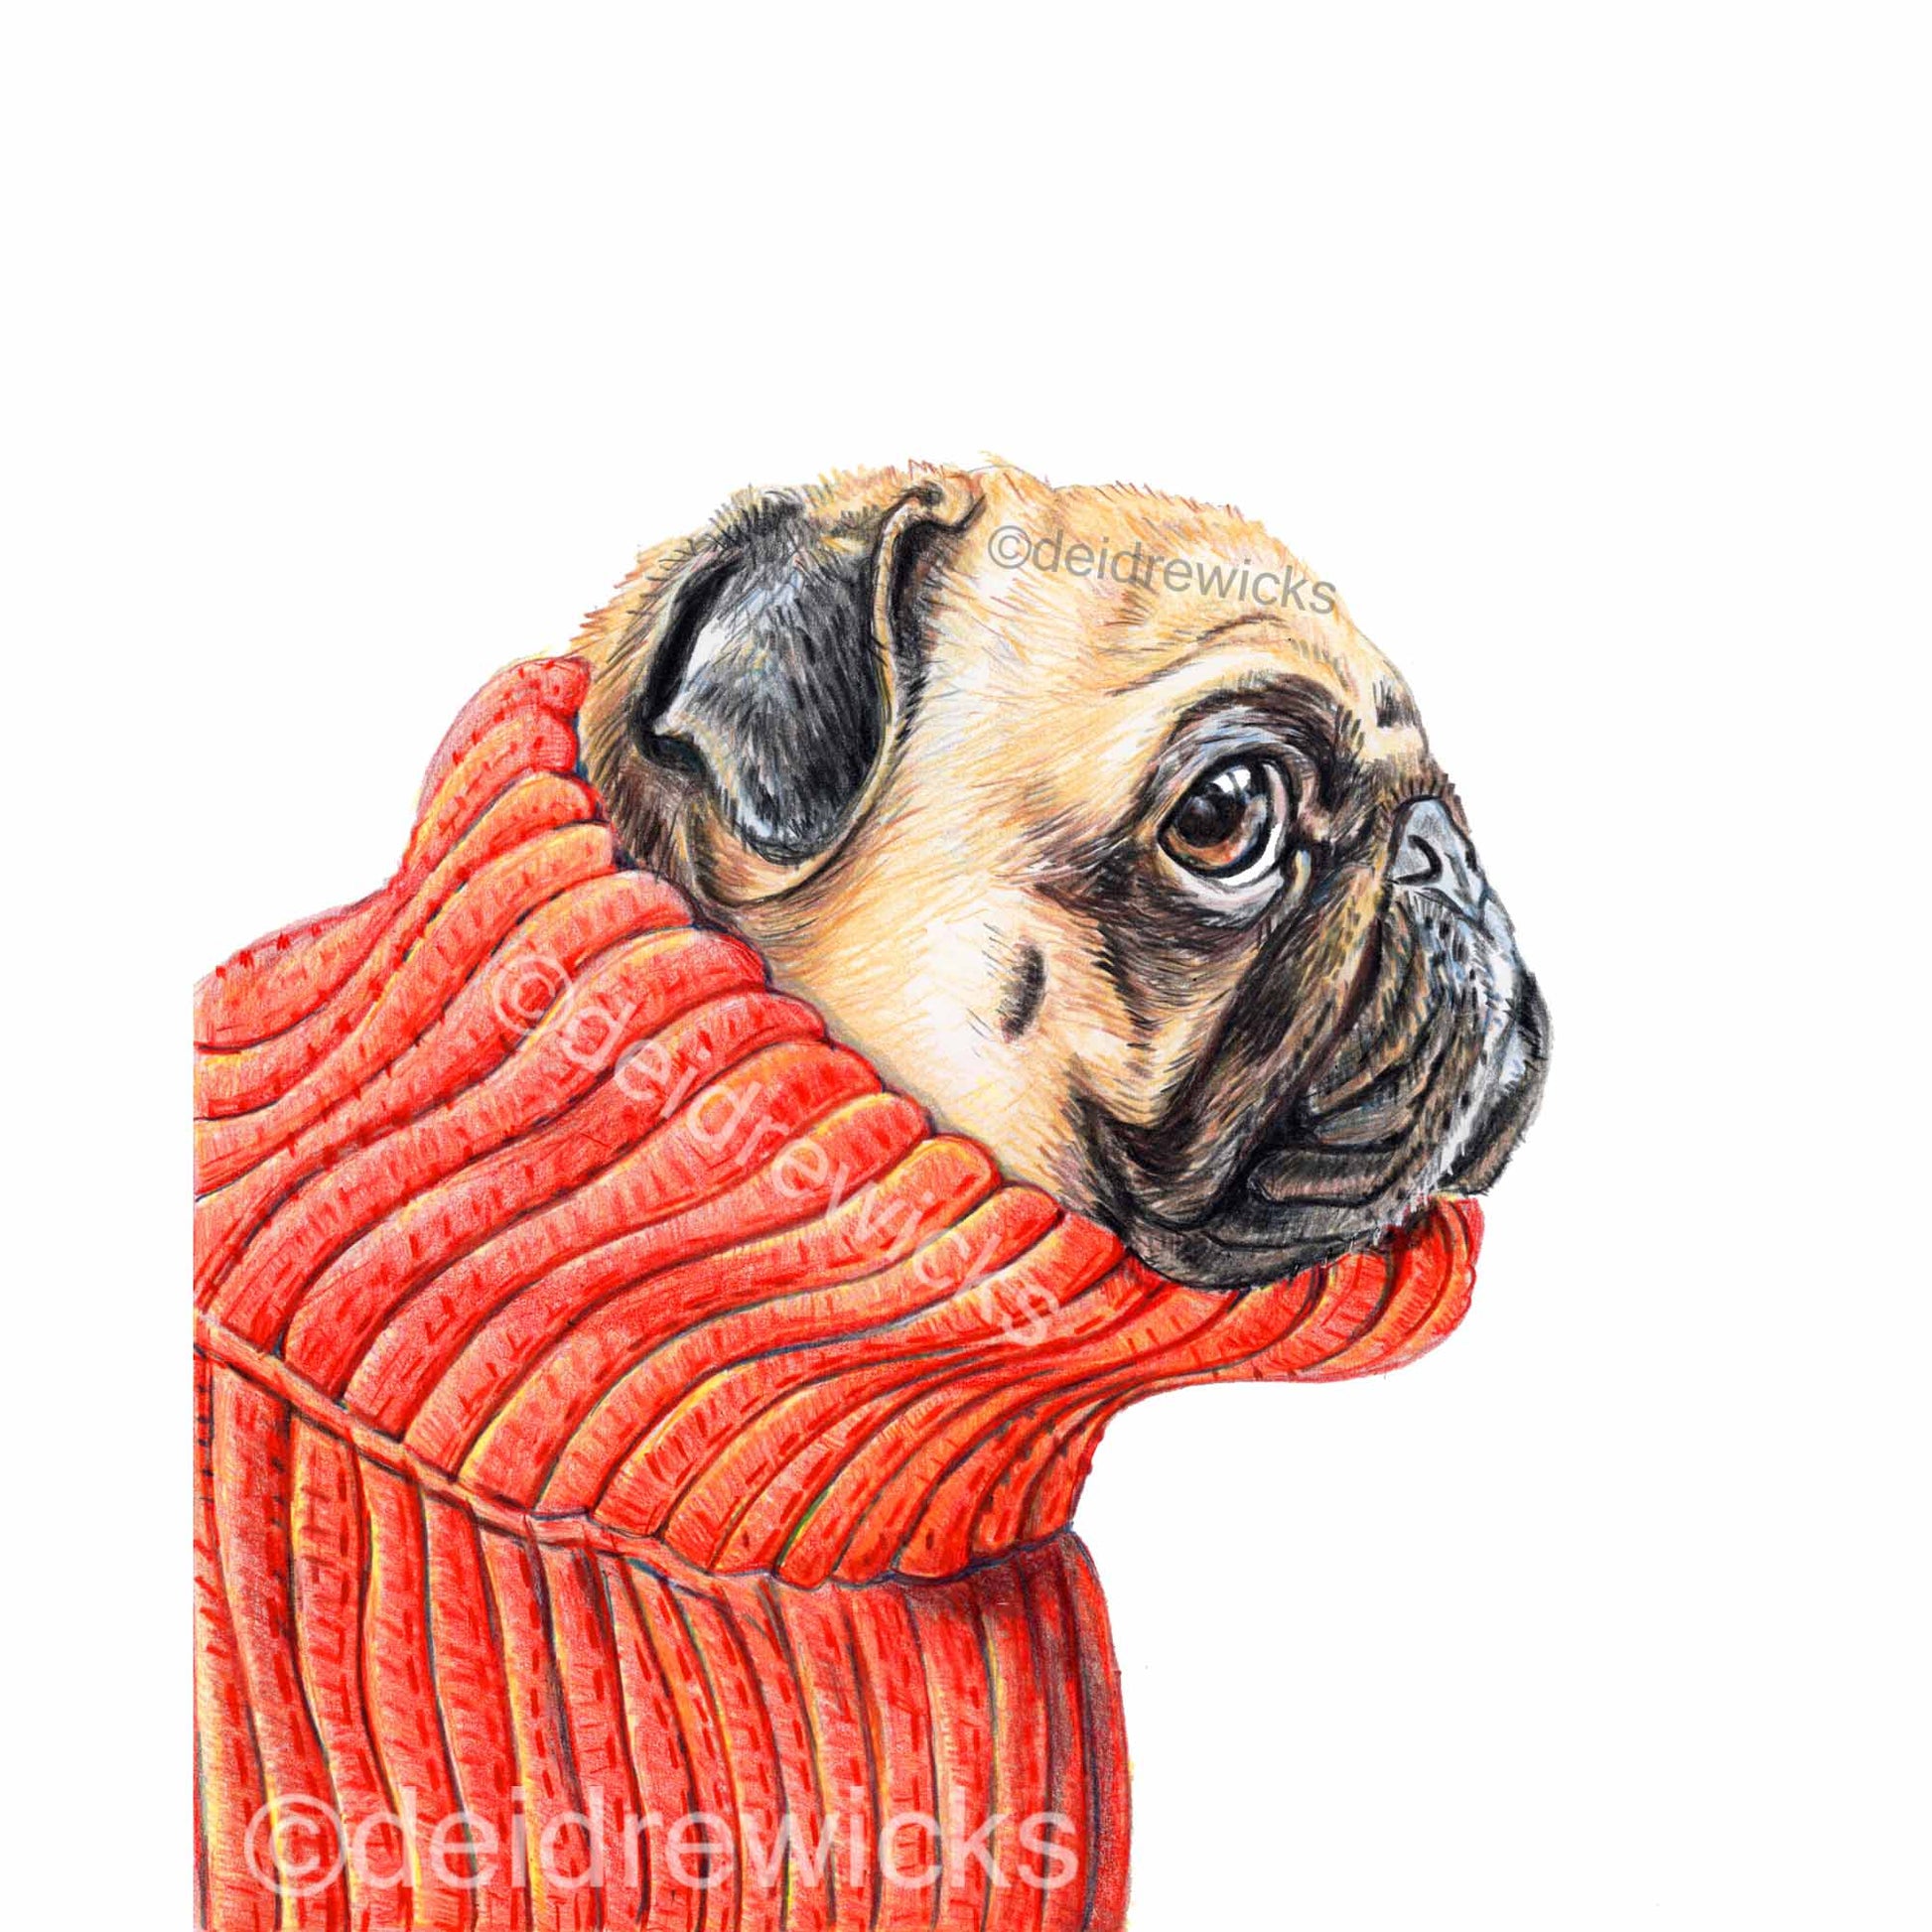 Turtle Pug Print - Coloured Drawing a Dog Wearing a Turtle Neck by Deidre Wicks